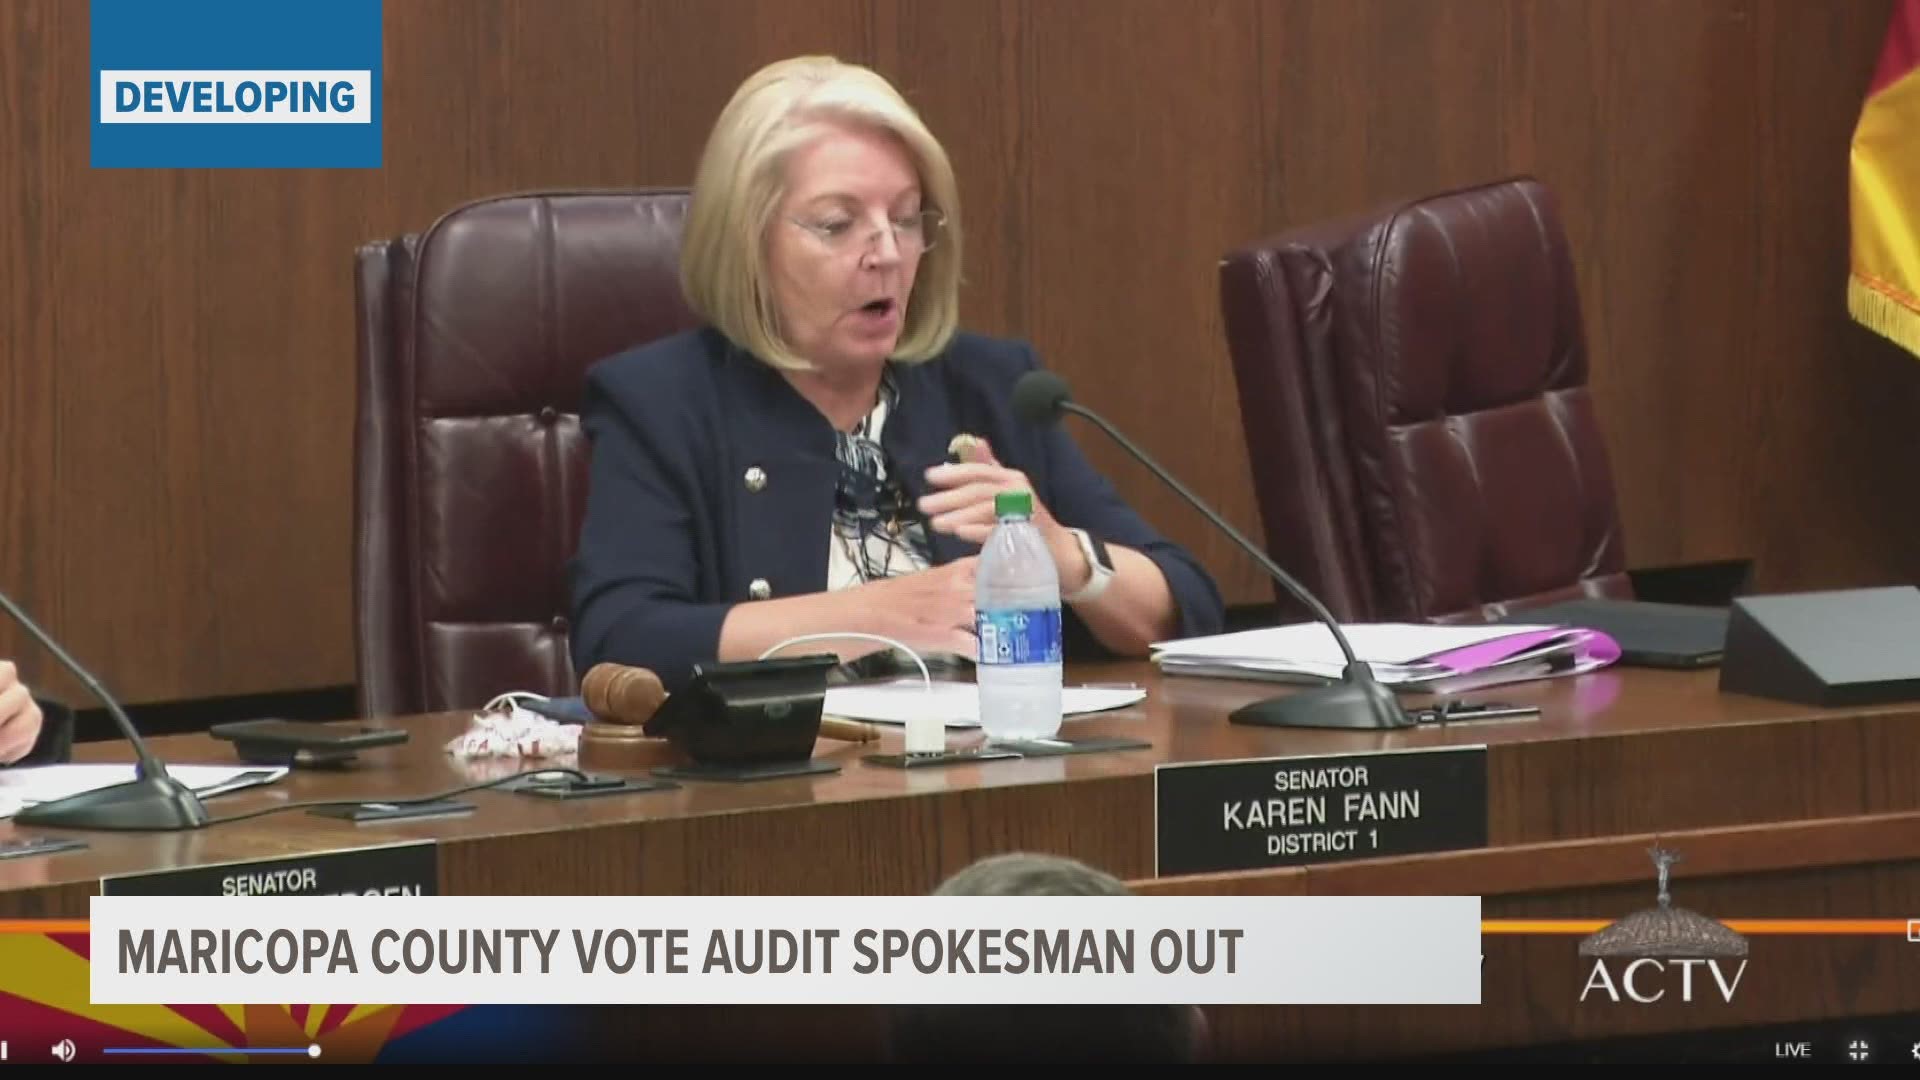 Karen Fann has requested more election documents from the Maricopa County Board. The board has already said it doesn't have or won't turn over those documents.